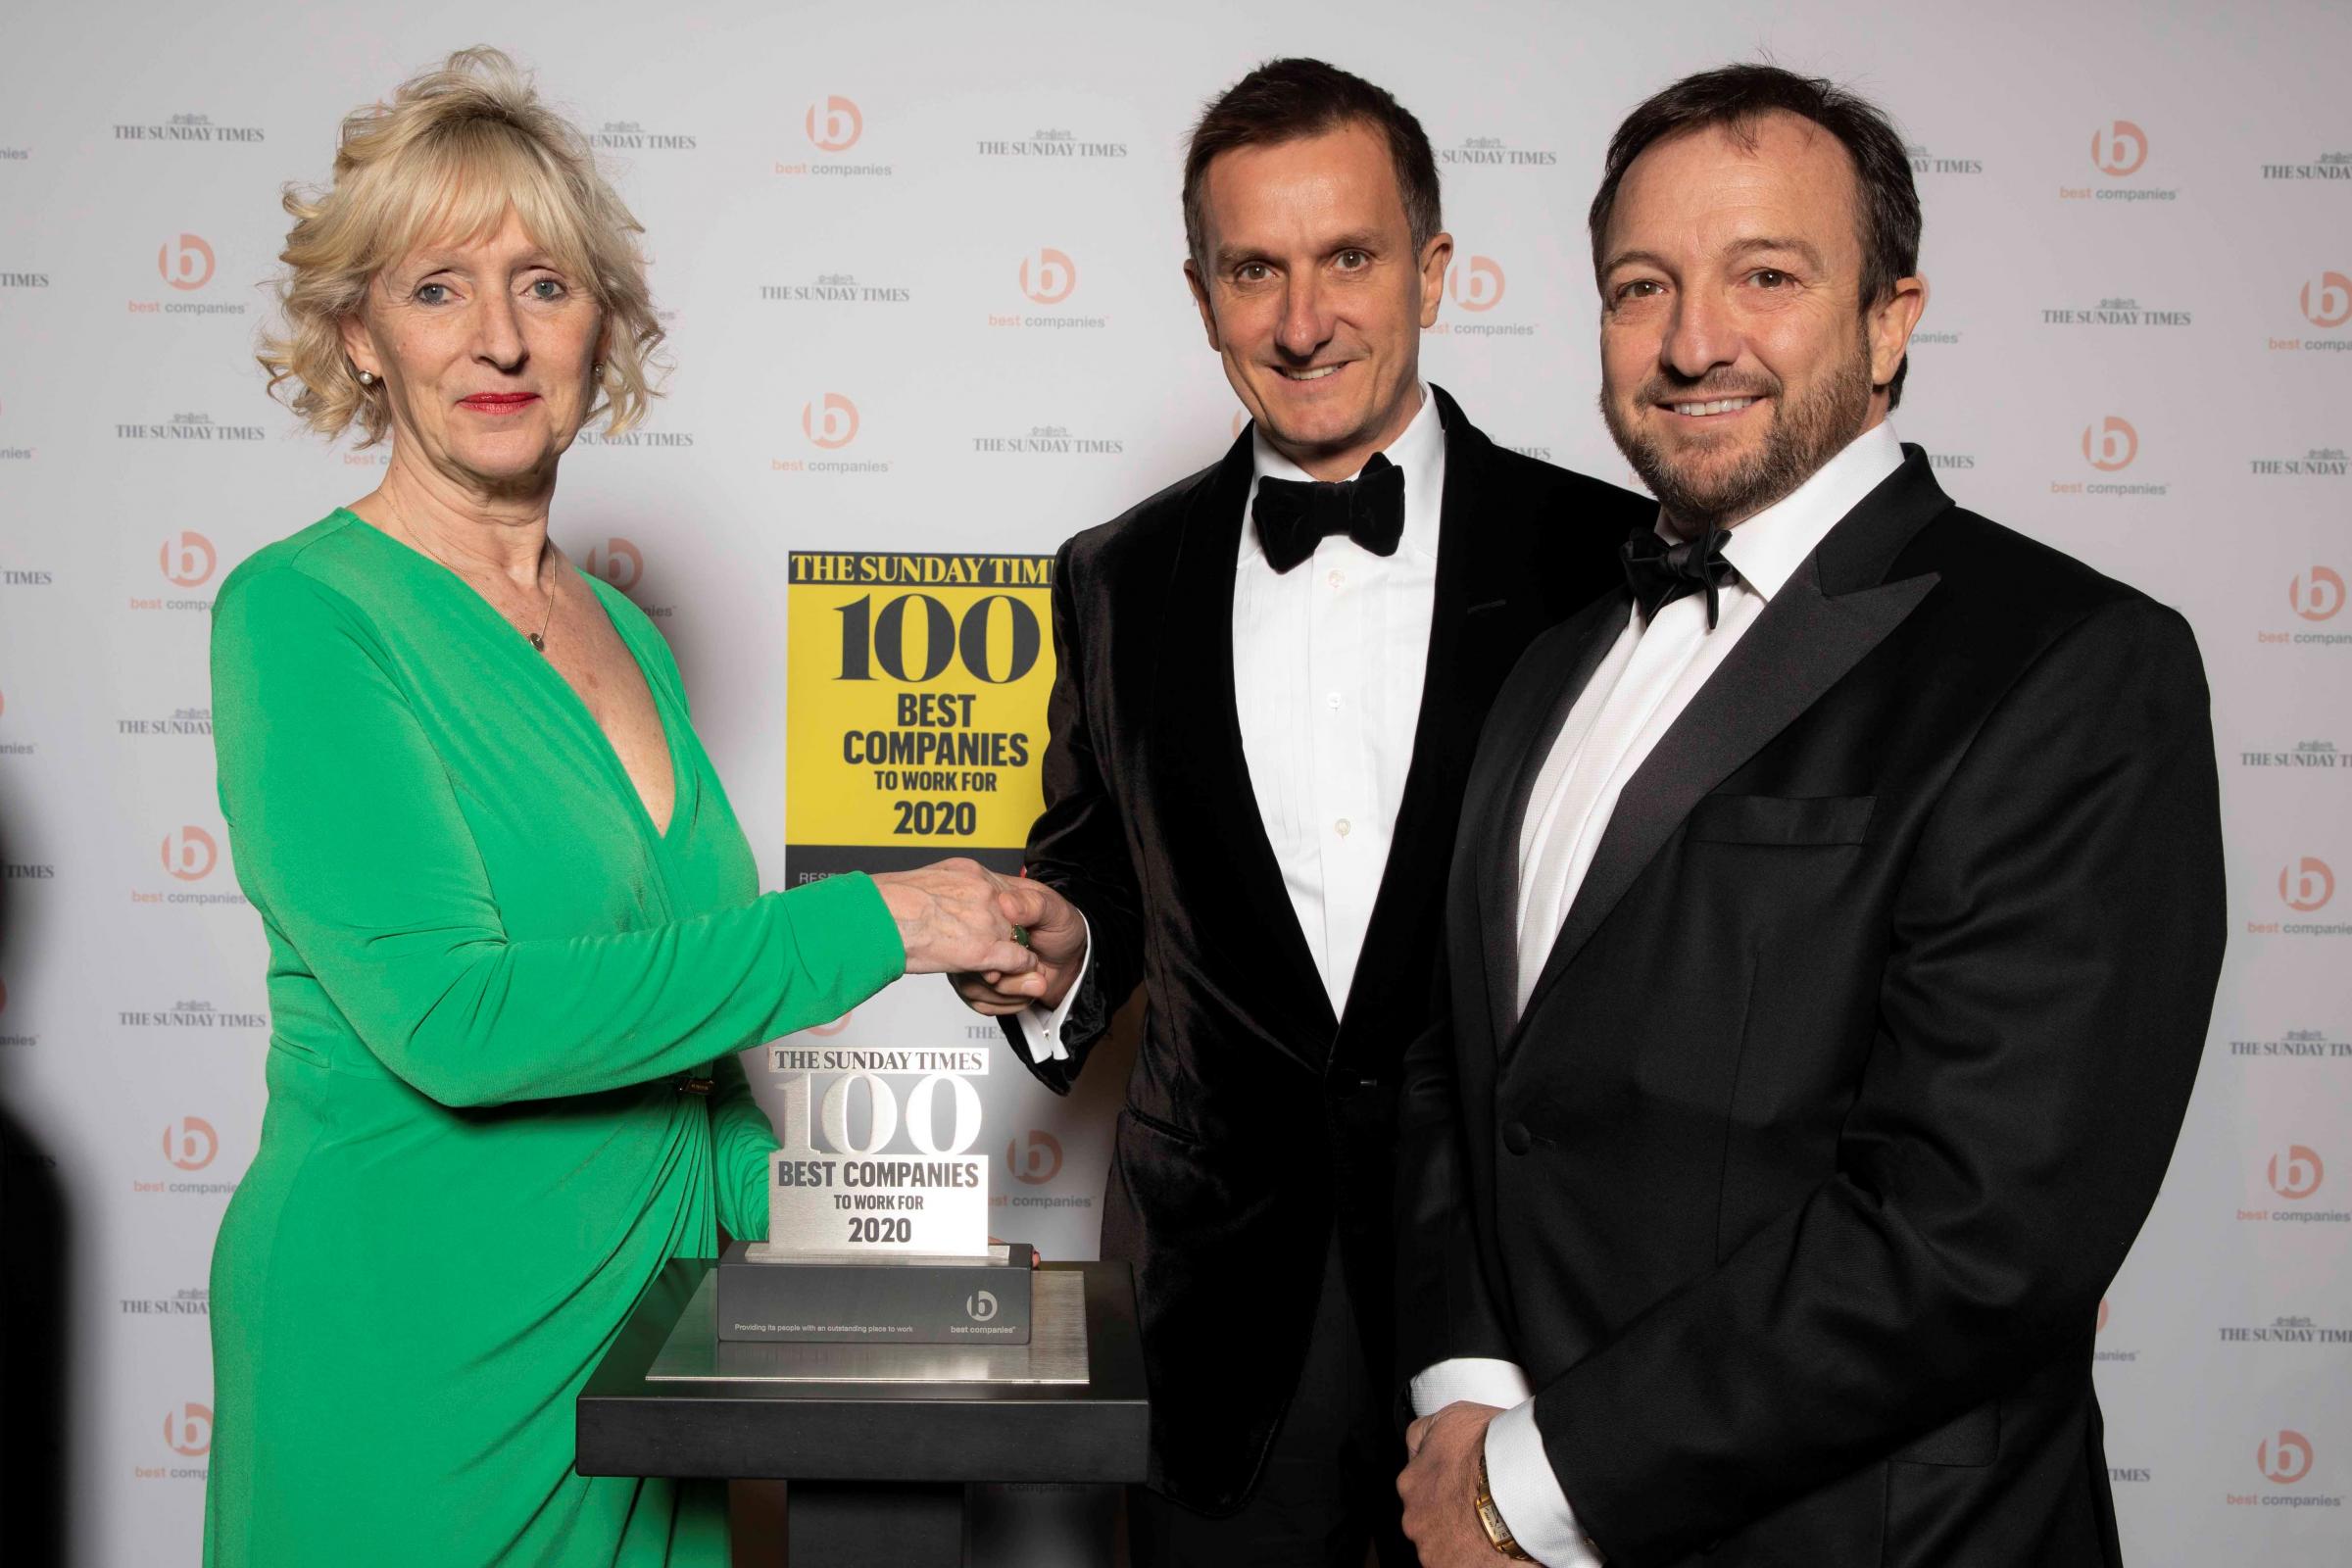 Brother Spencer McCarthy (centre) and Clinton McCarthy (right) pick up third place award at Sunday Times Top 100 Best Companies to Work For 2020